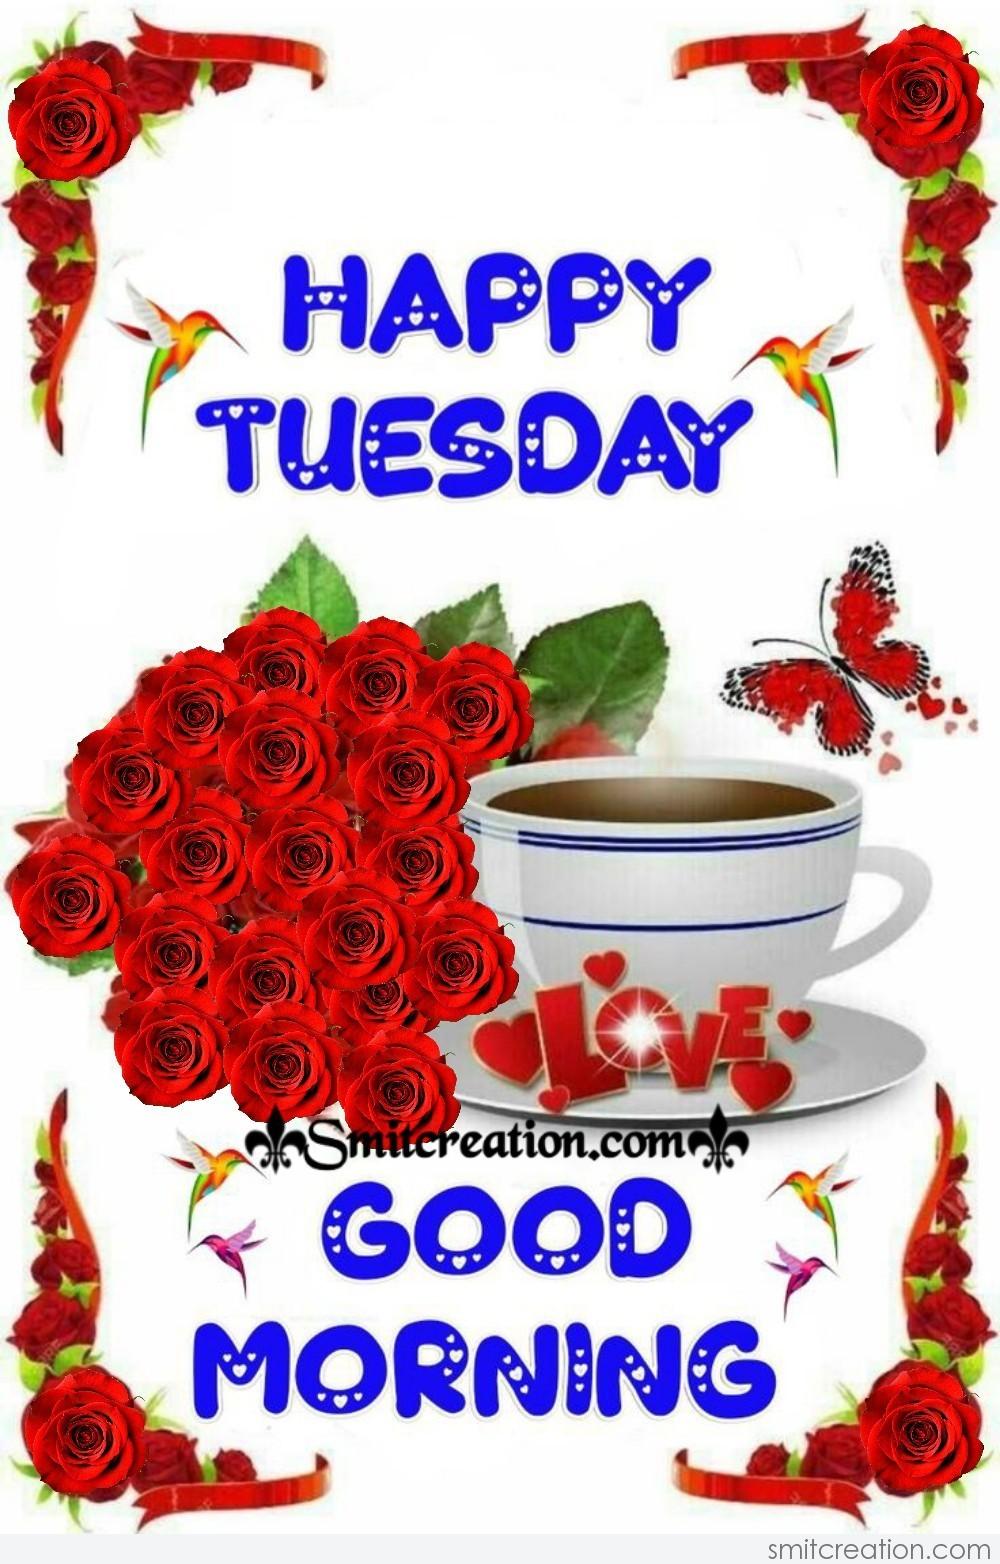 Good Morning Happy Tuesday Images Good Morning Happy Tuesday Quotes And Images Pestcare Jakarta